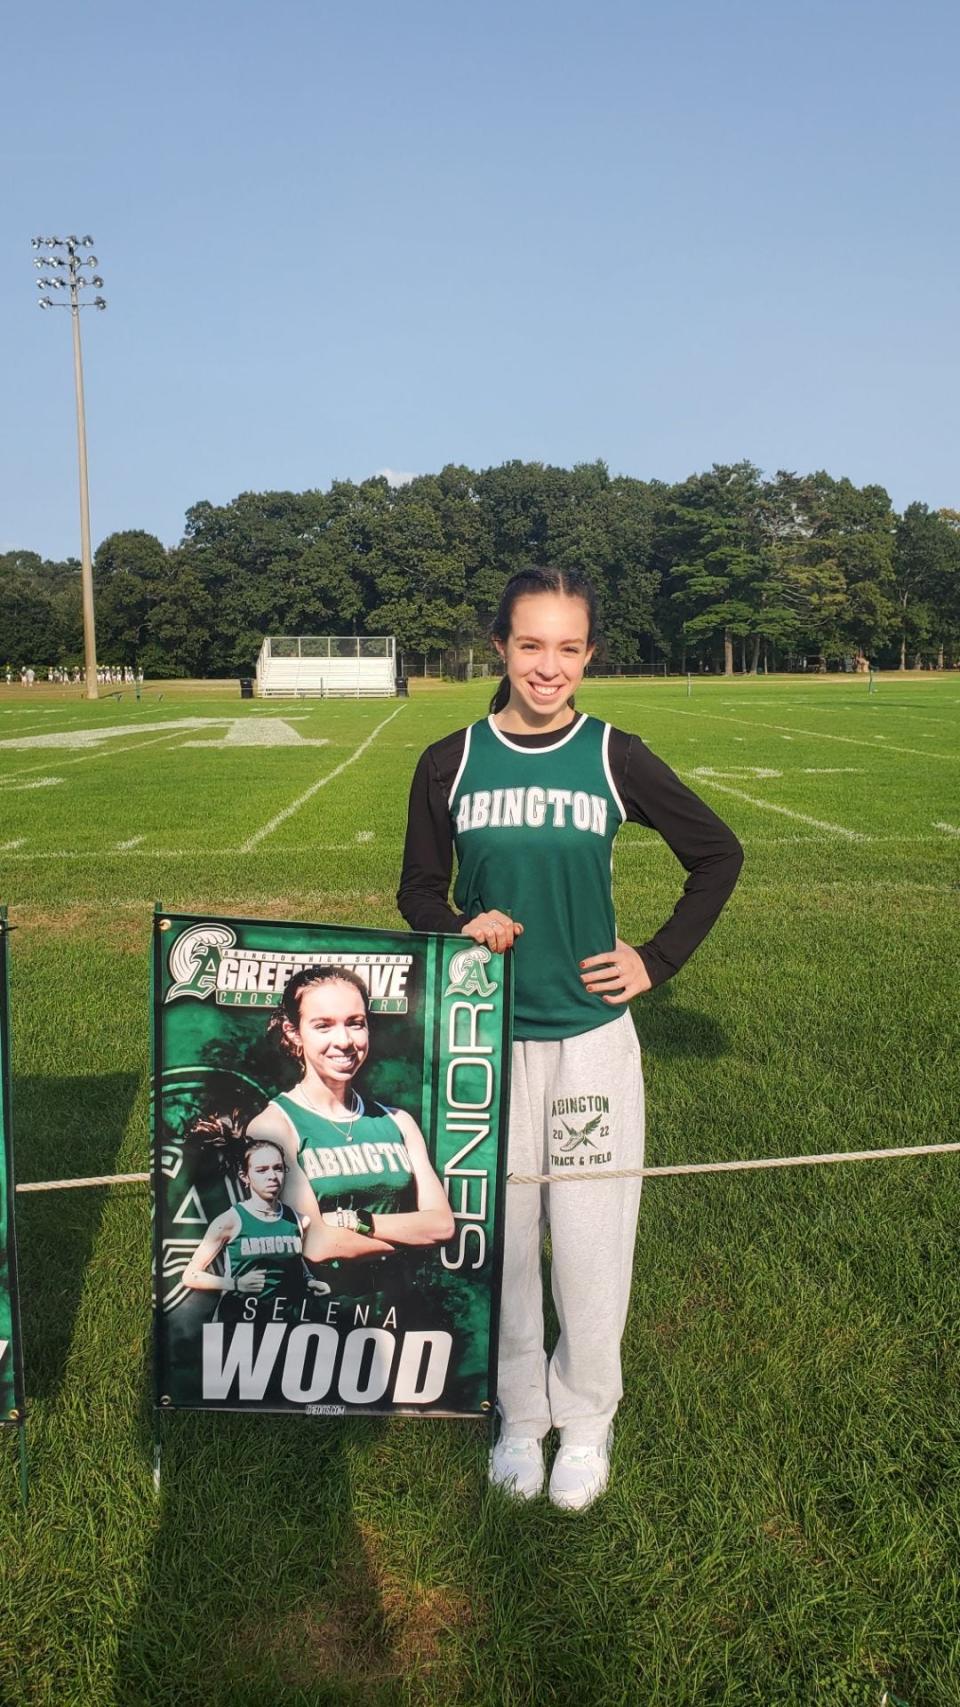 Selena Wood of Abington has been named to The Patriot Ledger/Enterprise All-Scholastic Girls Cross Country Team.